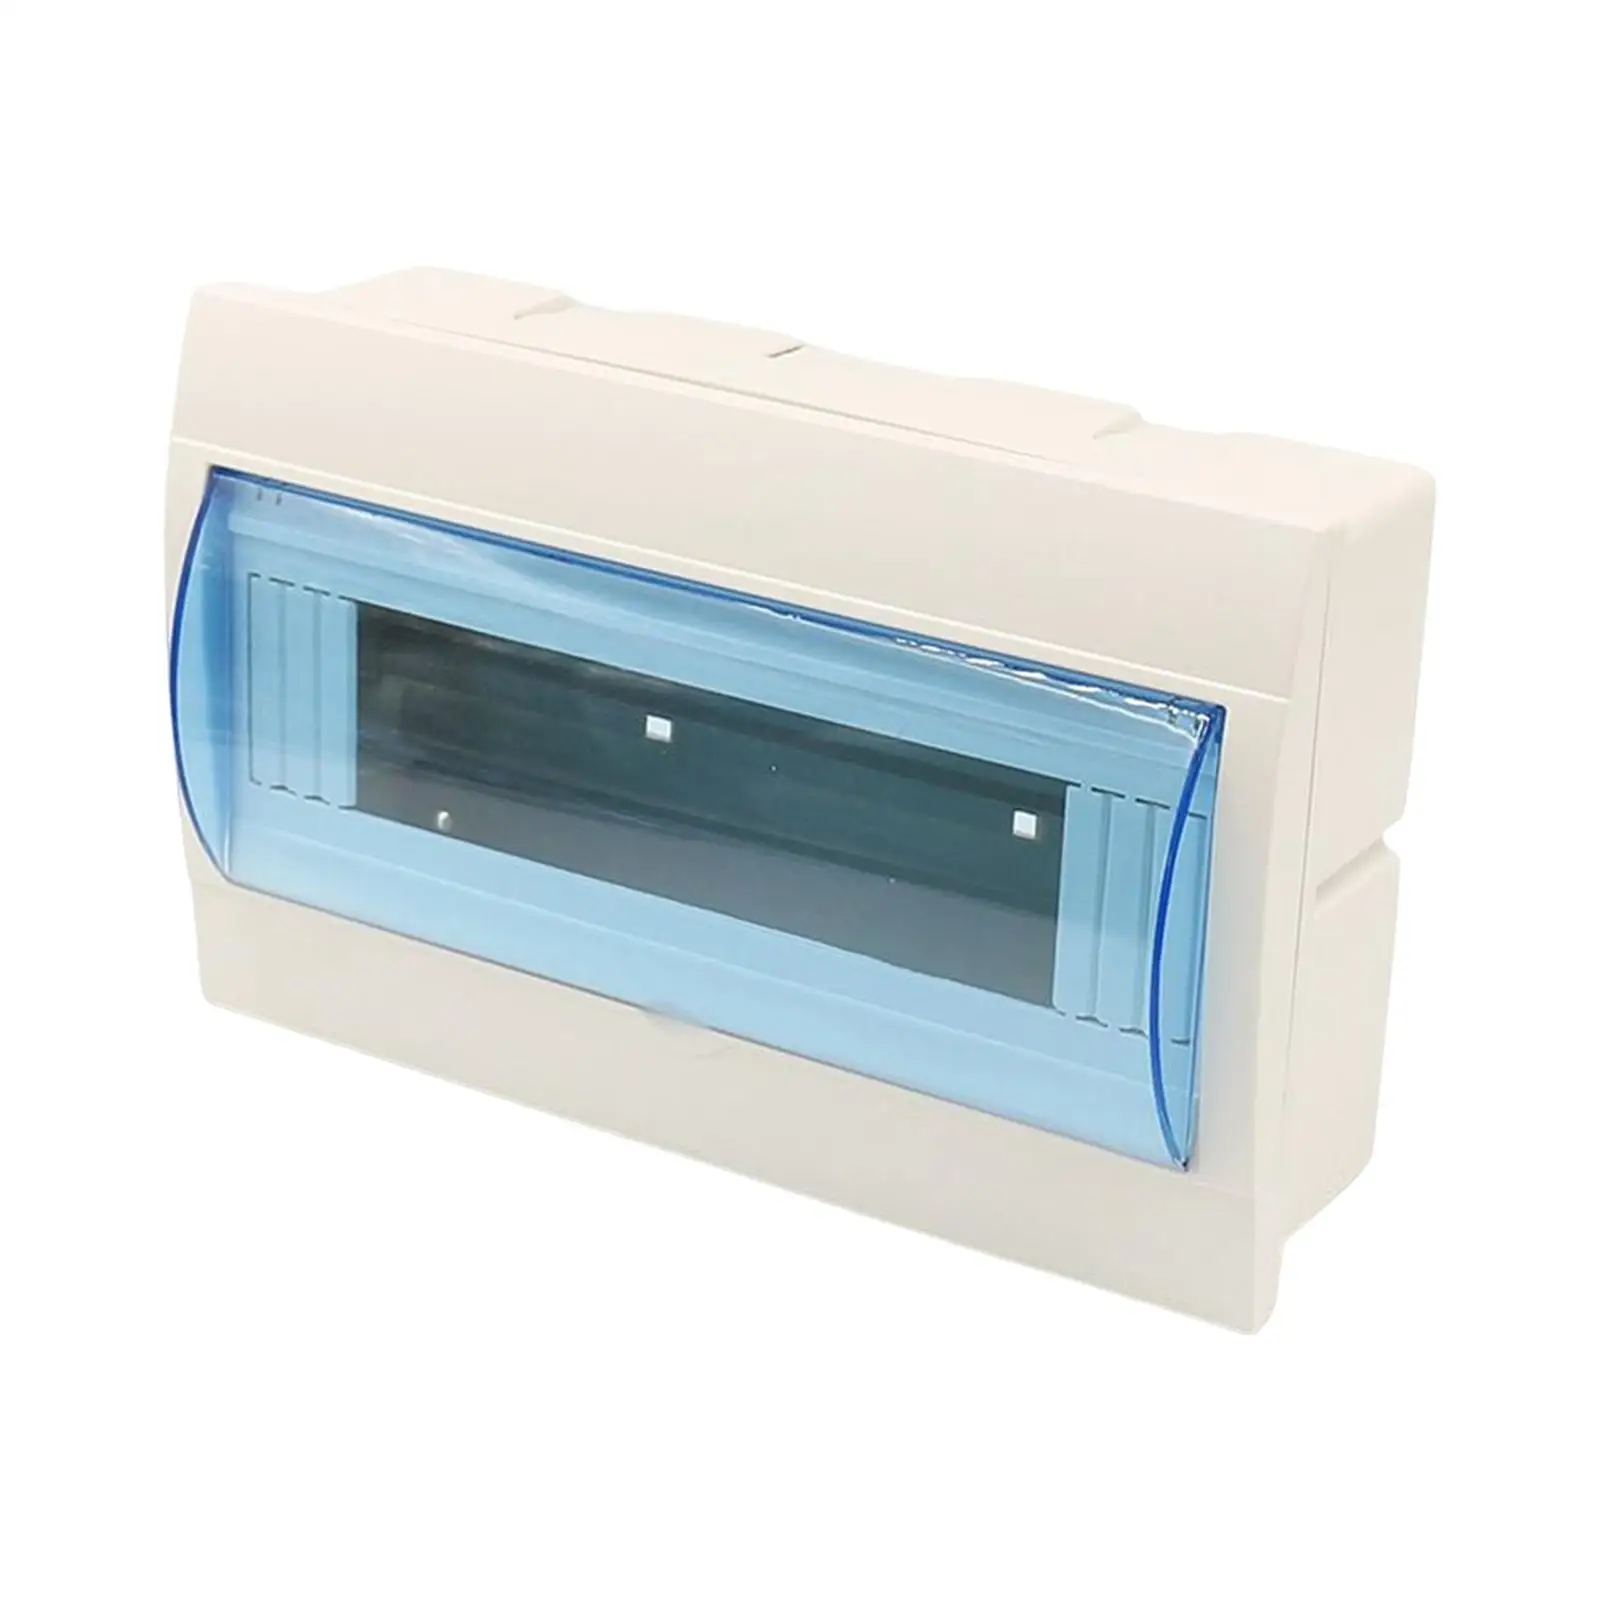 Waterproof Circuit Breaker Box Electrical Panel Cover Power Distribution Box Distribution Box for Indoor Outdoor Electrical